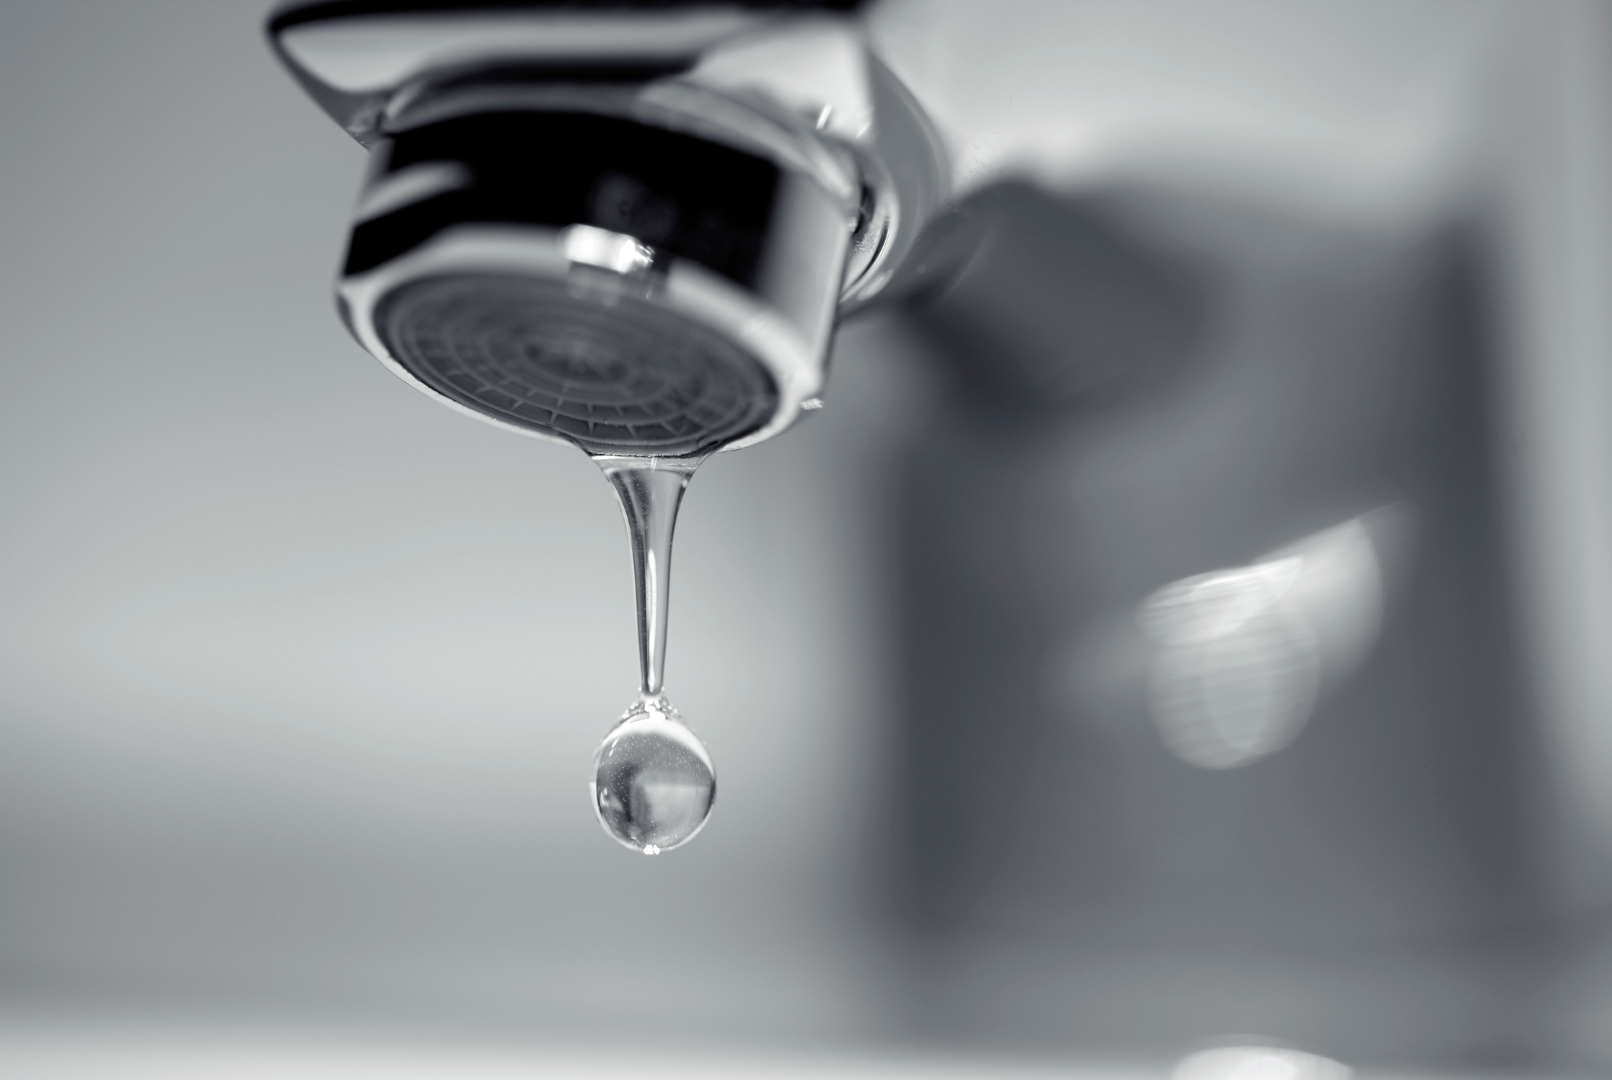 Legionella : A Guide To A Clean and Disinfection – The Clean